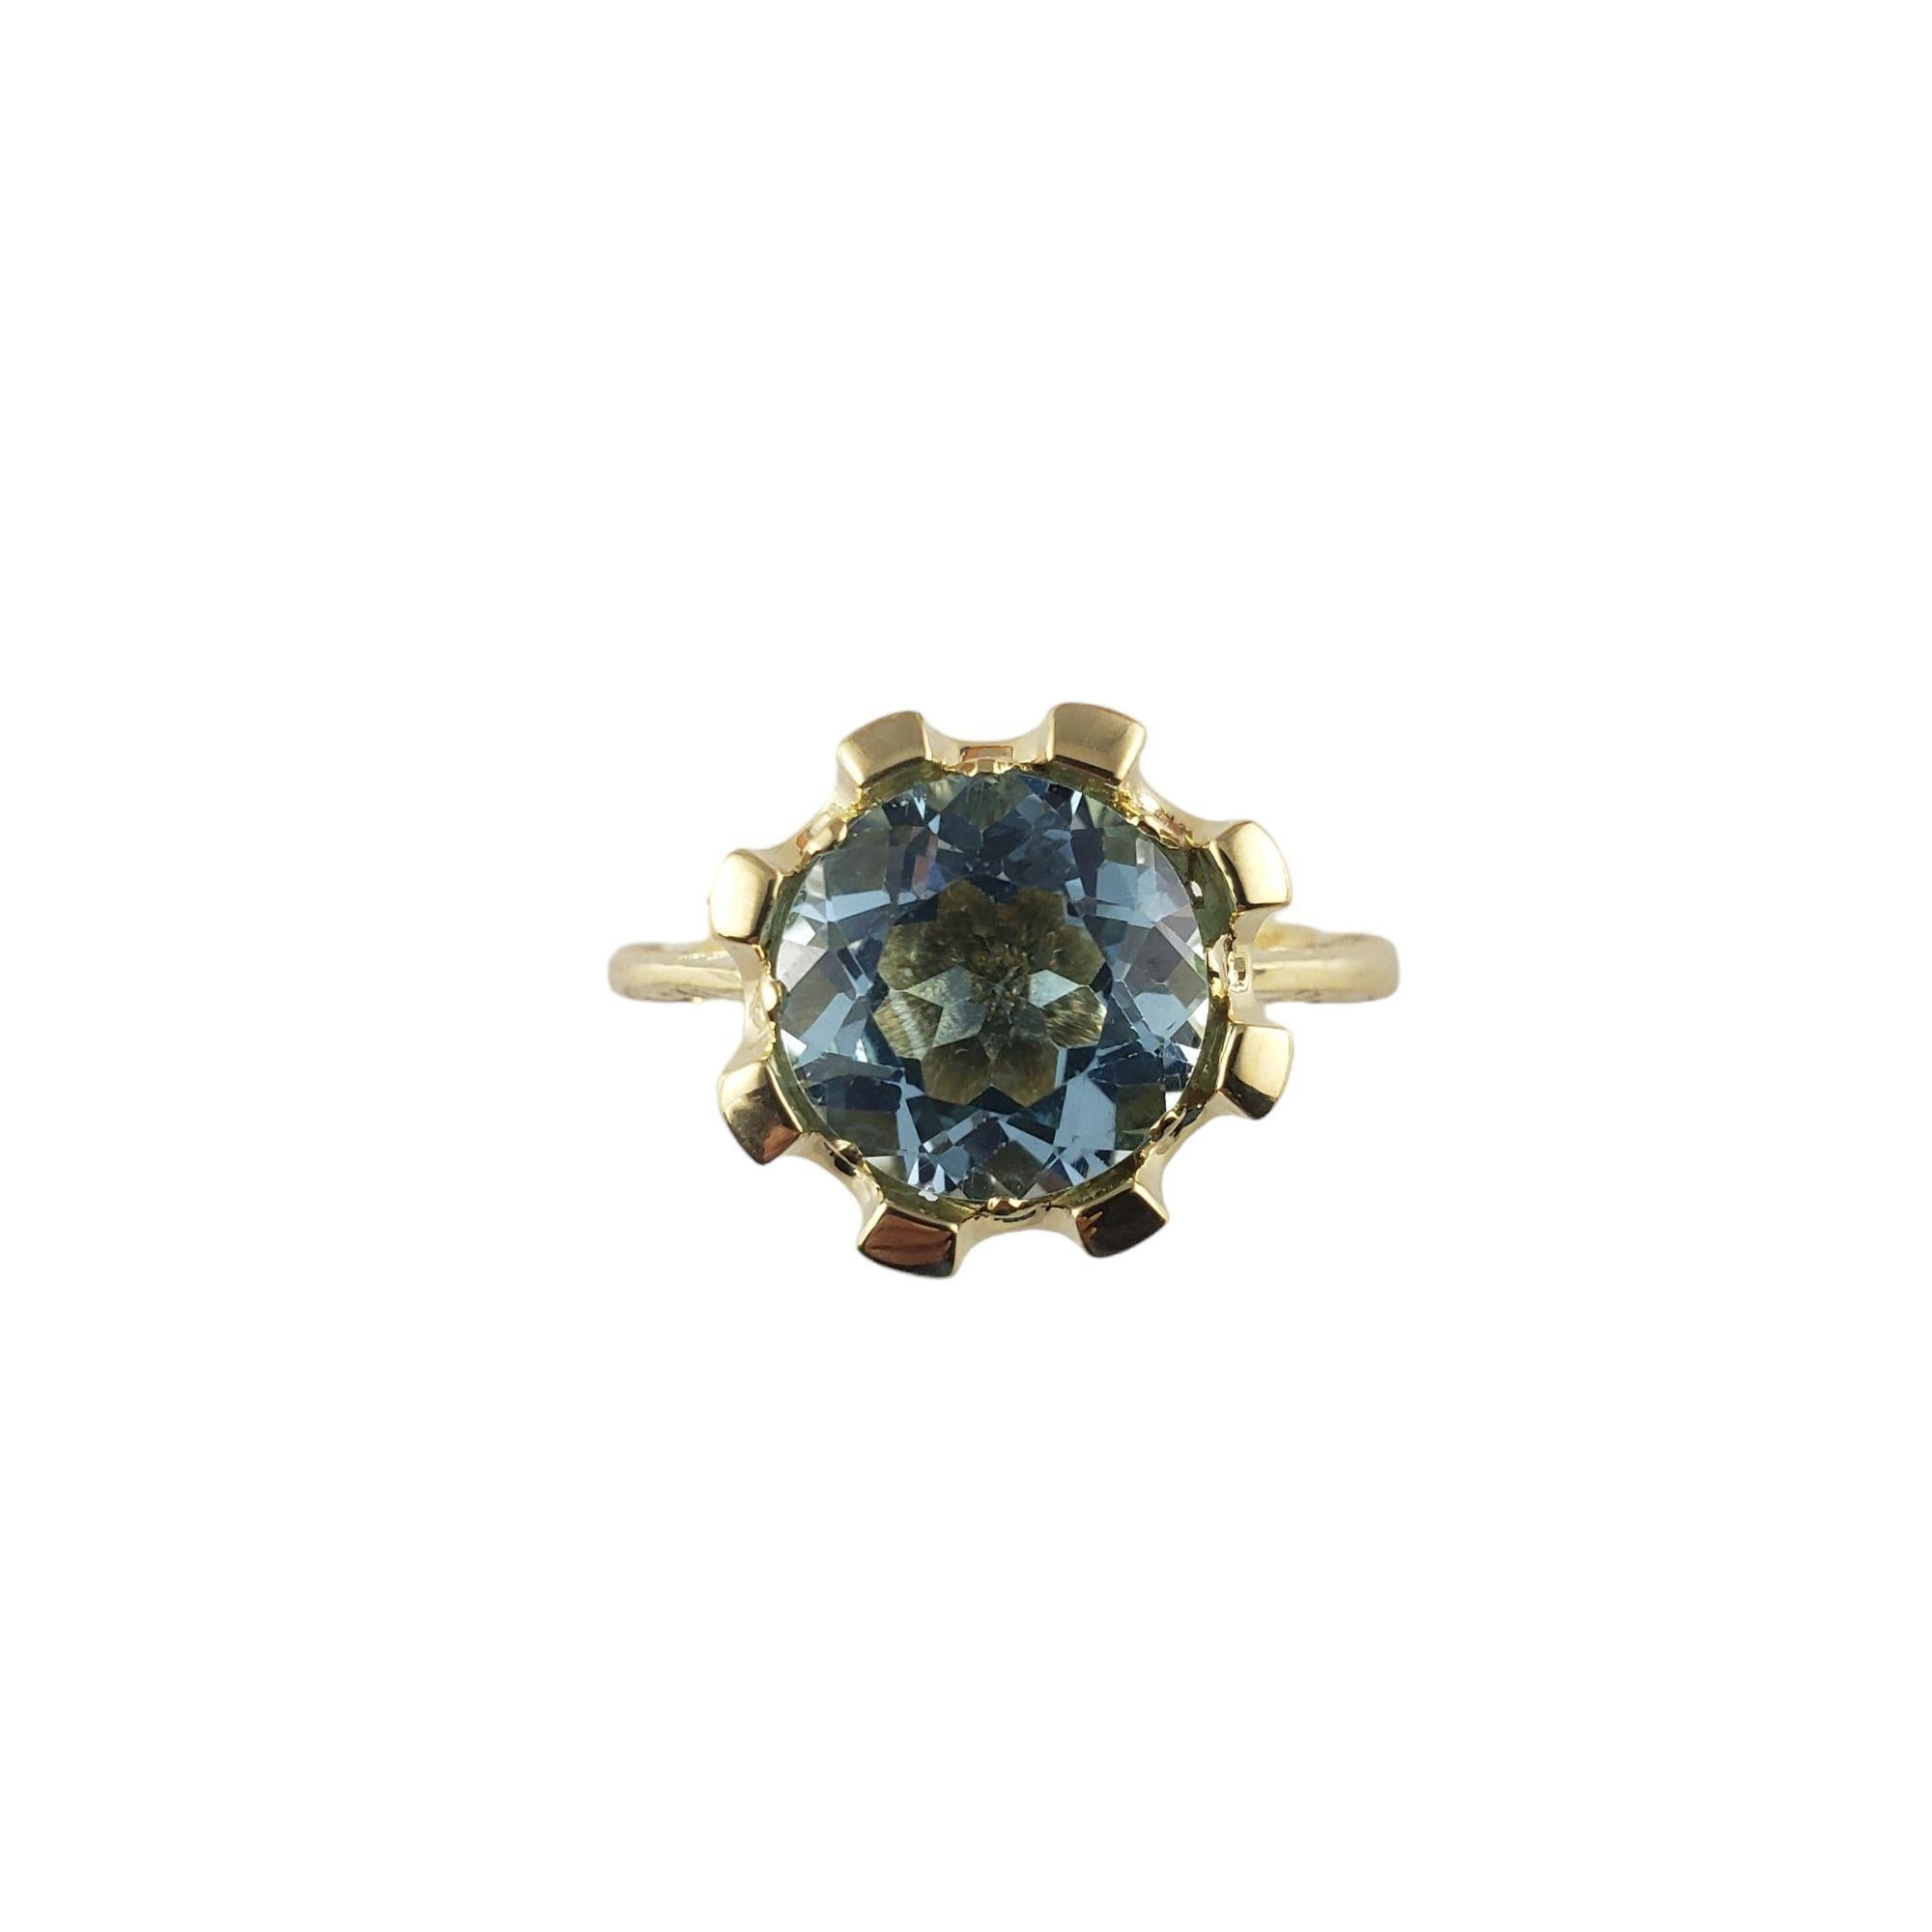 14 Karat Yellow Gold Swiss Blue Topaz Ring Size 8 JAGi Certified-

This lovely ring features one round Swiss blue topaz (10.8 mm) set in beautifully detailed 14K yellow gold.

Topaz weight:  5.87 ct.

Ring Size: 8

Weight:  5.9 gr./  3.7